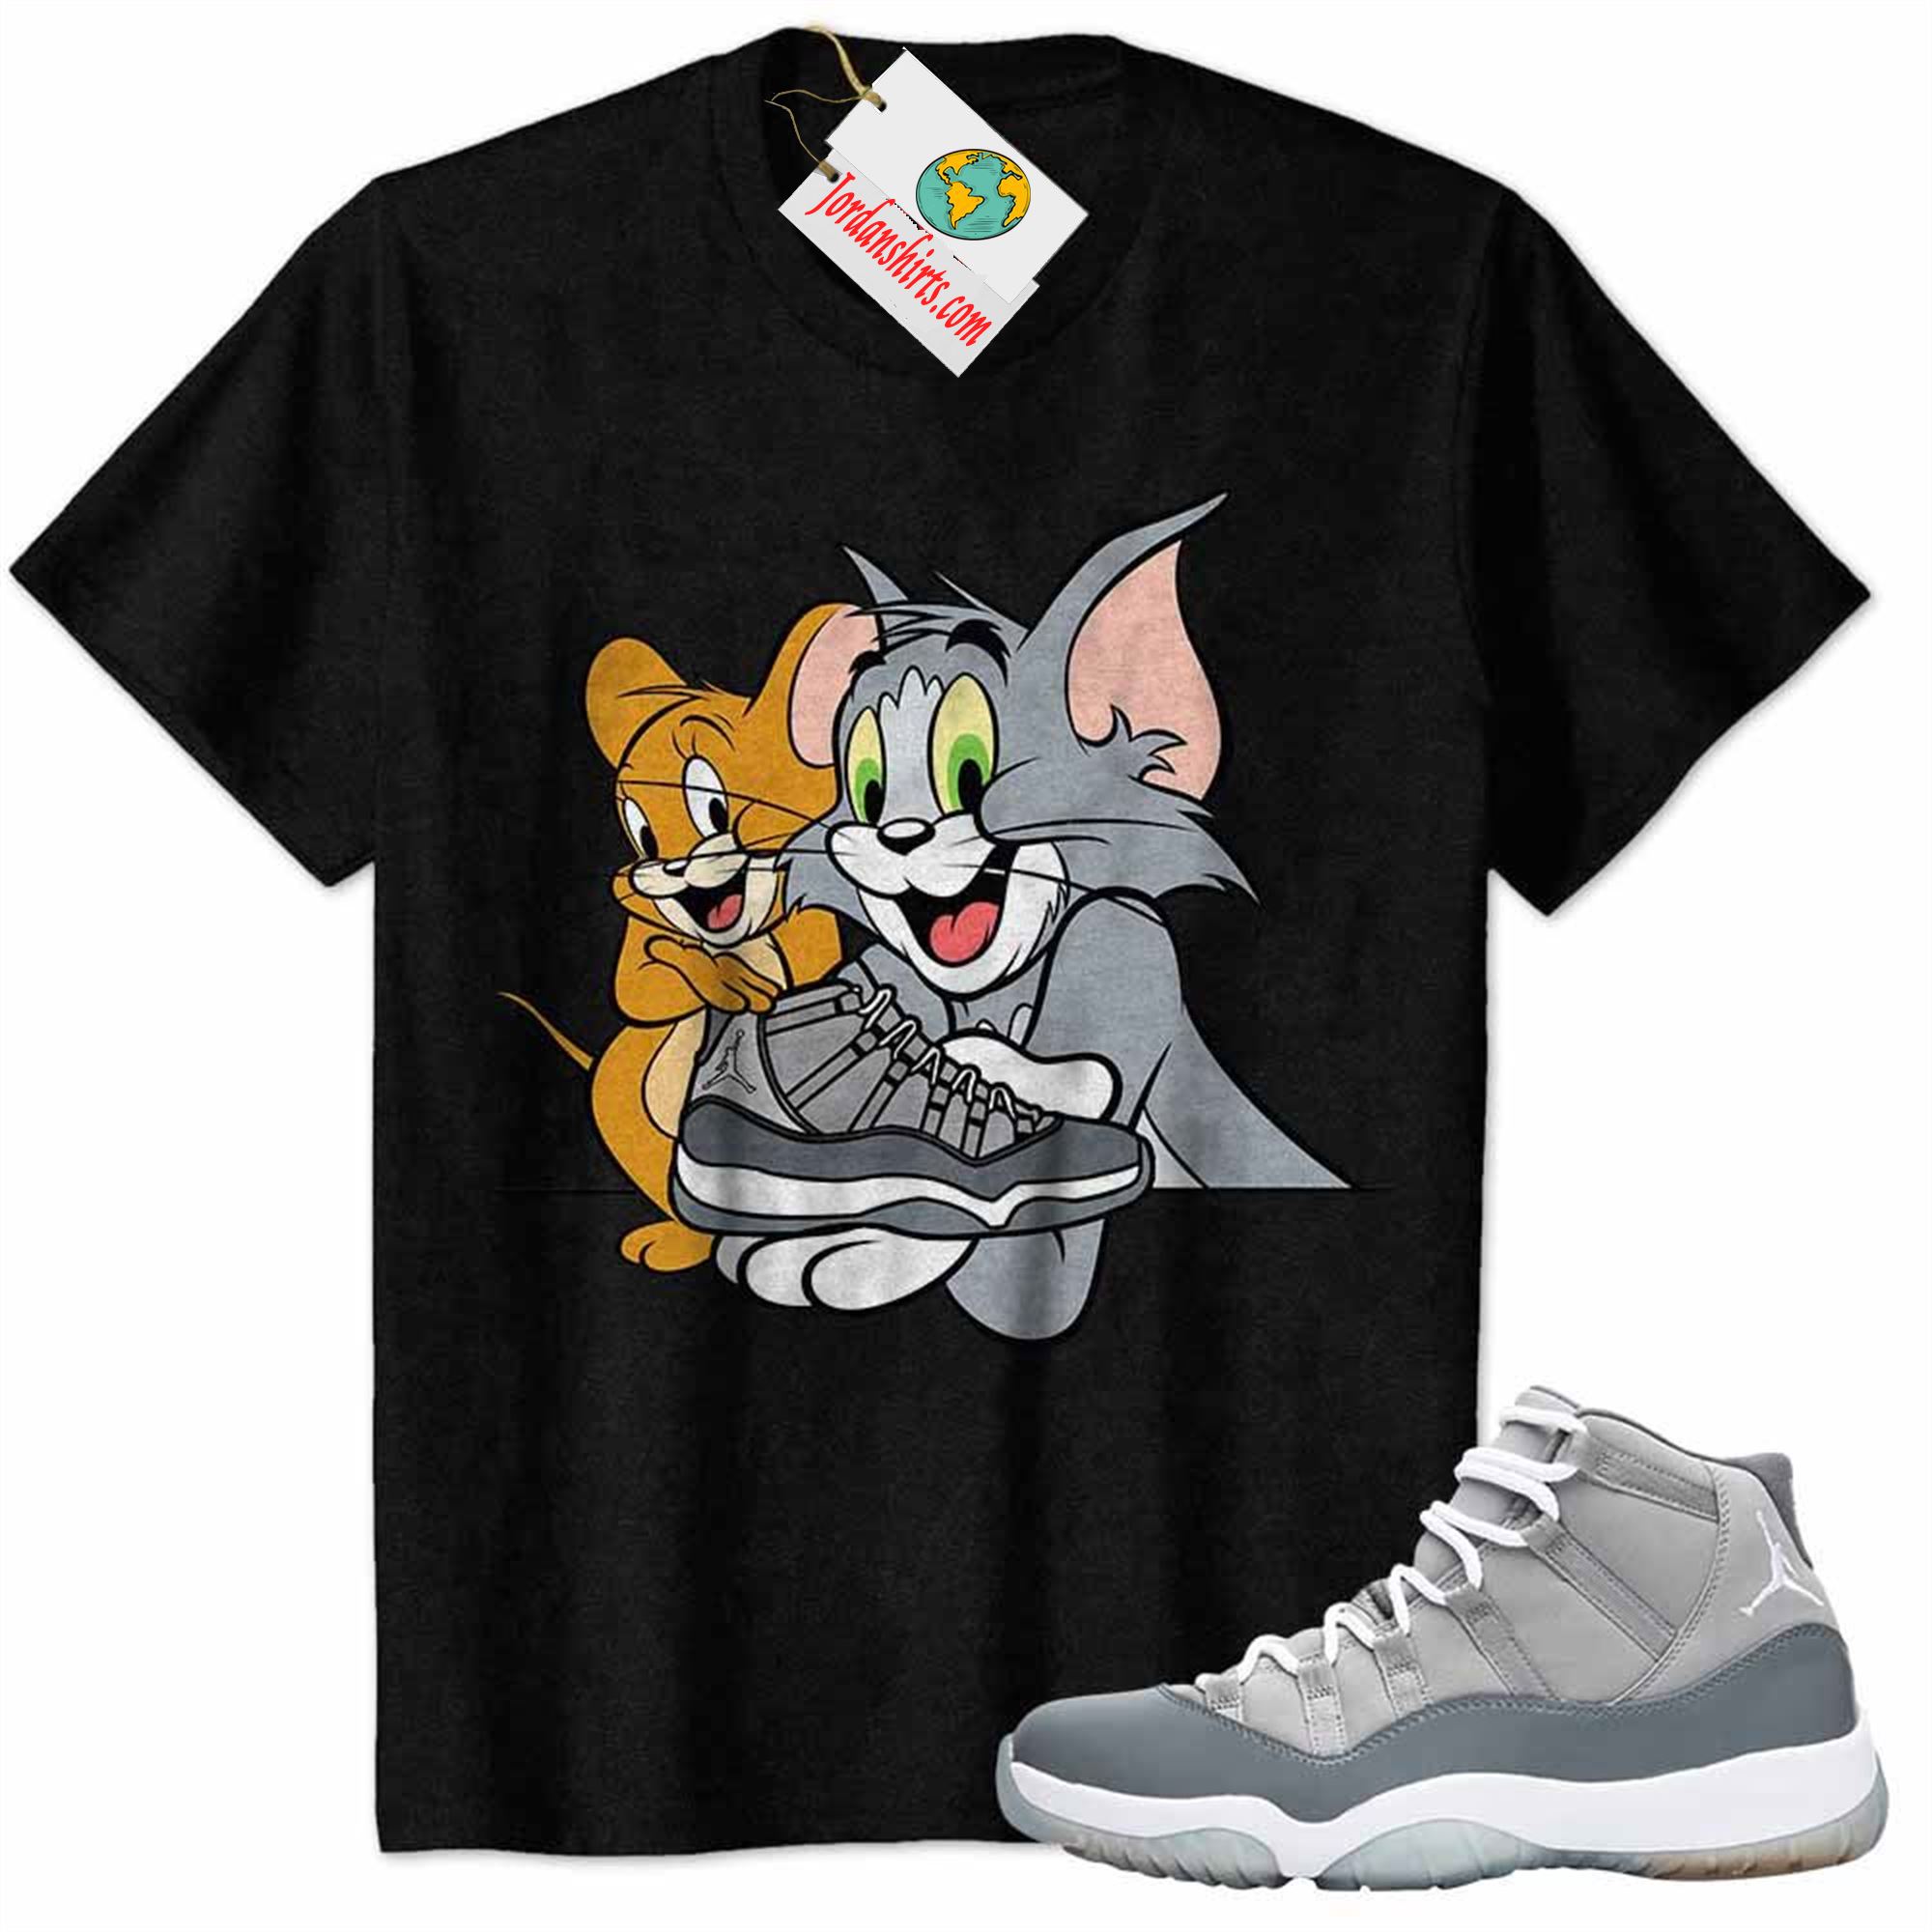 Jordan 11 Shirt, Tom And Jerry Shoes In Hand Black Air Jordan 11 Cool Grey 11s Plus Size Up To 5xl